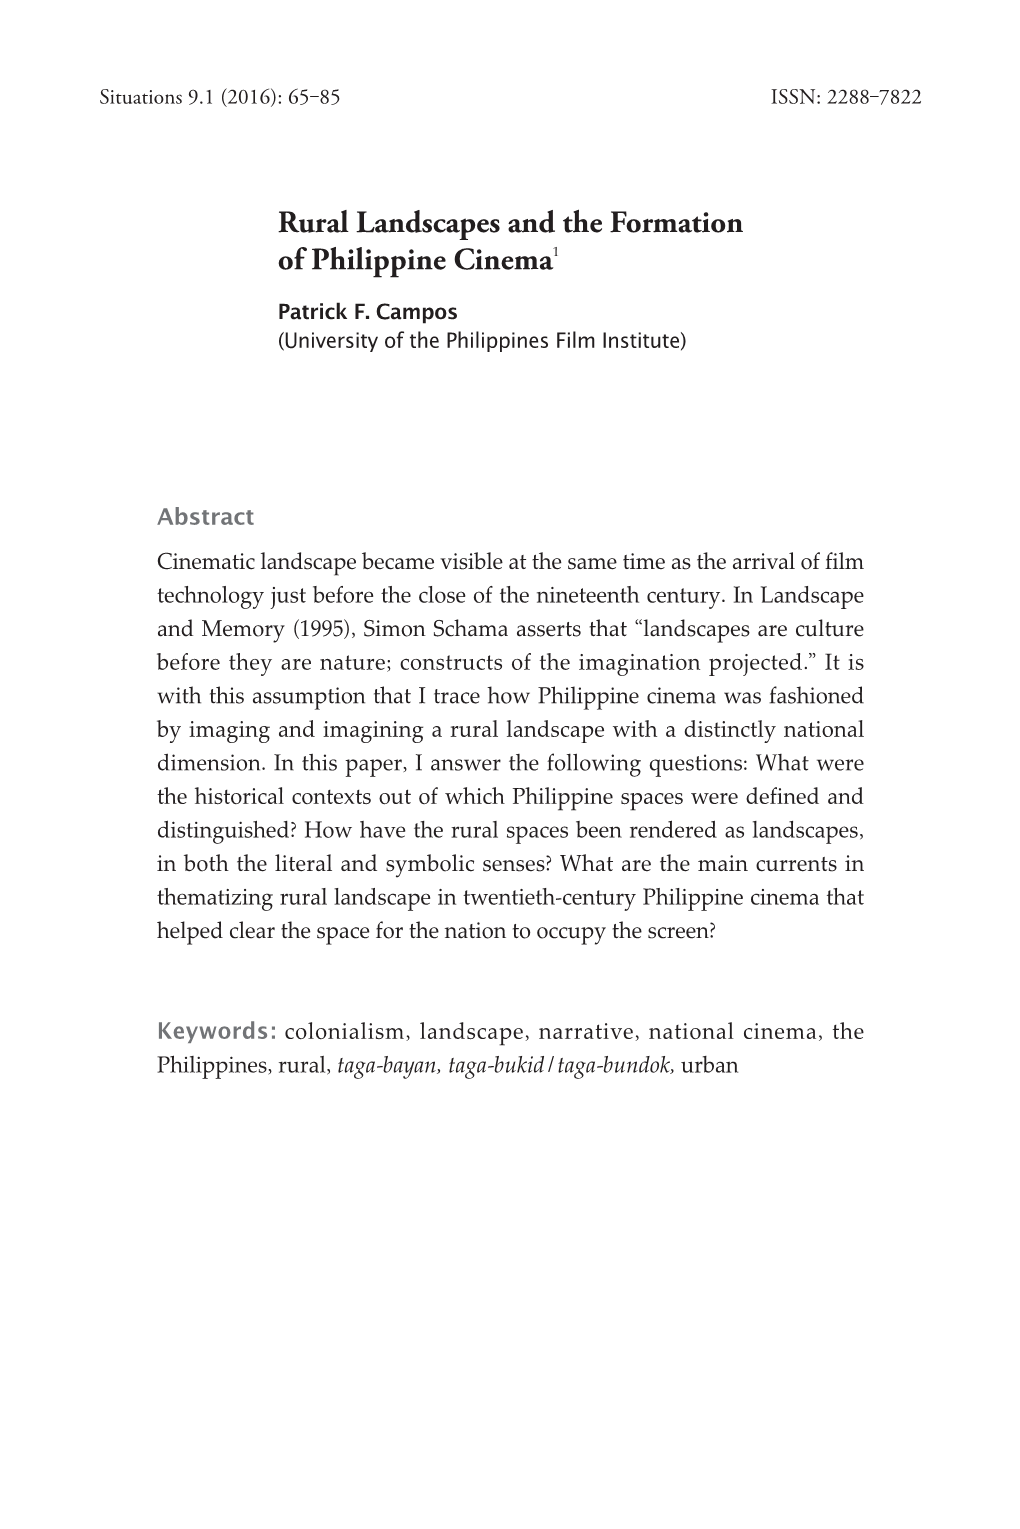 Rural Landscapes and the Formation of Philippine Cinema1